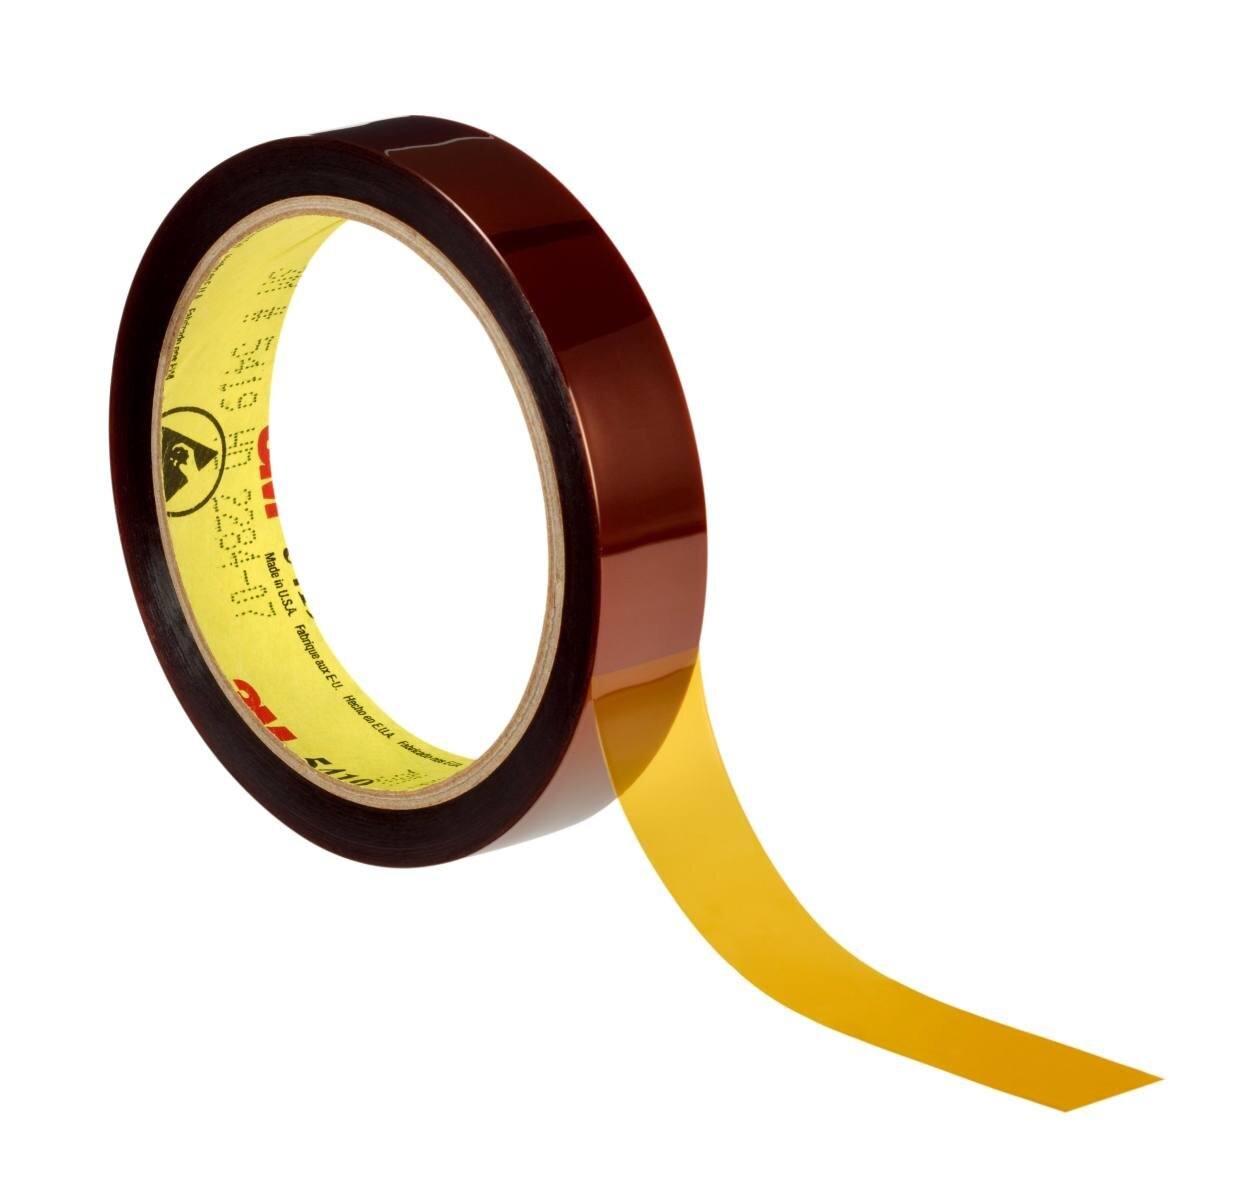 3M High-temperature polyimide adhesive tape 5419, brown, 6.4 mm x 33 m, 68.58 Âµm